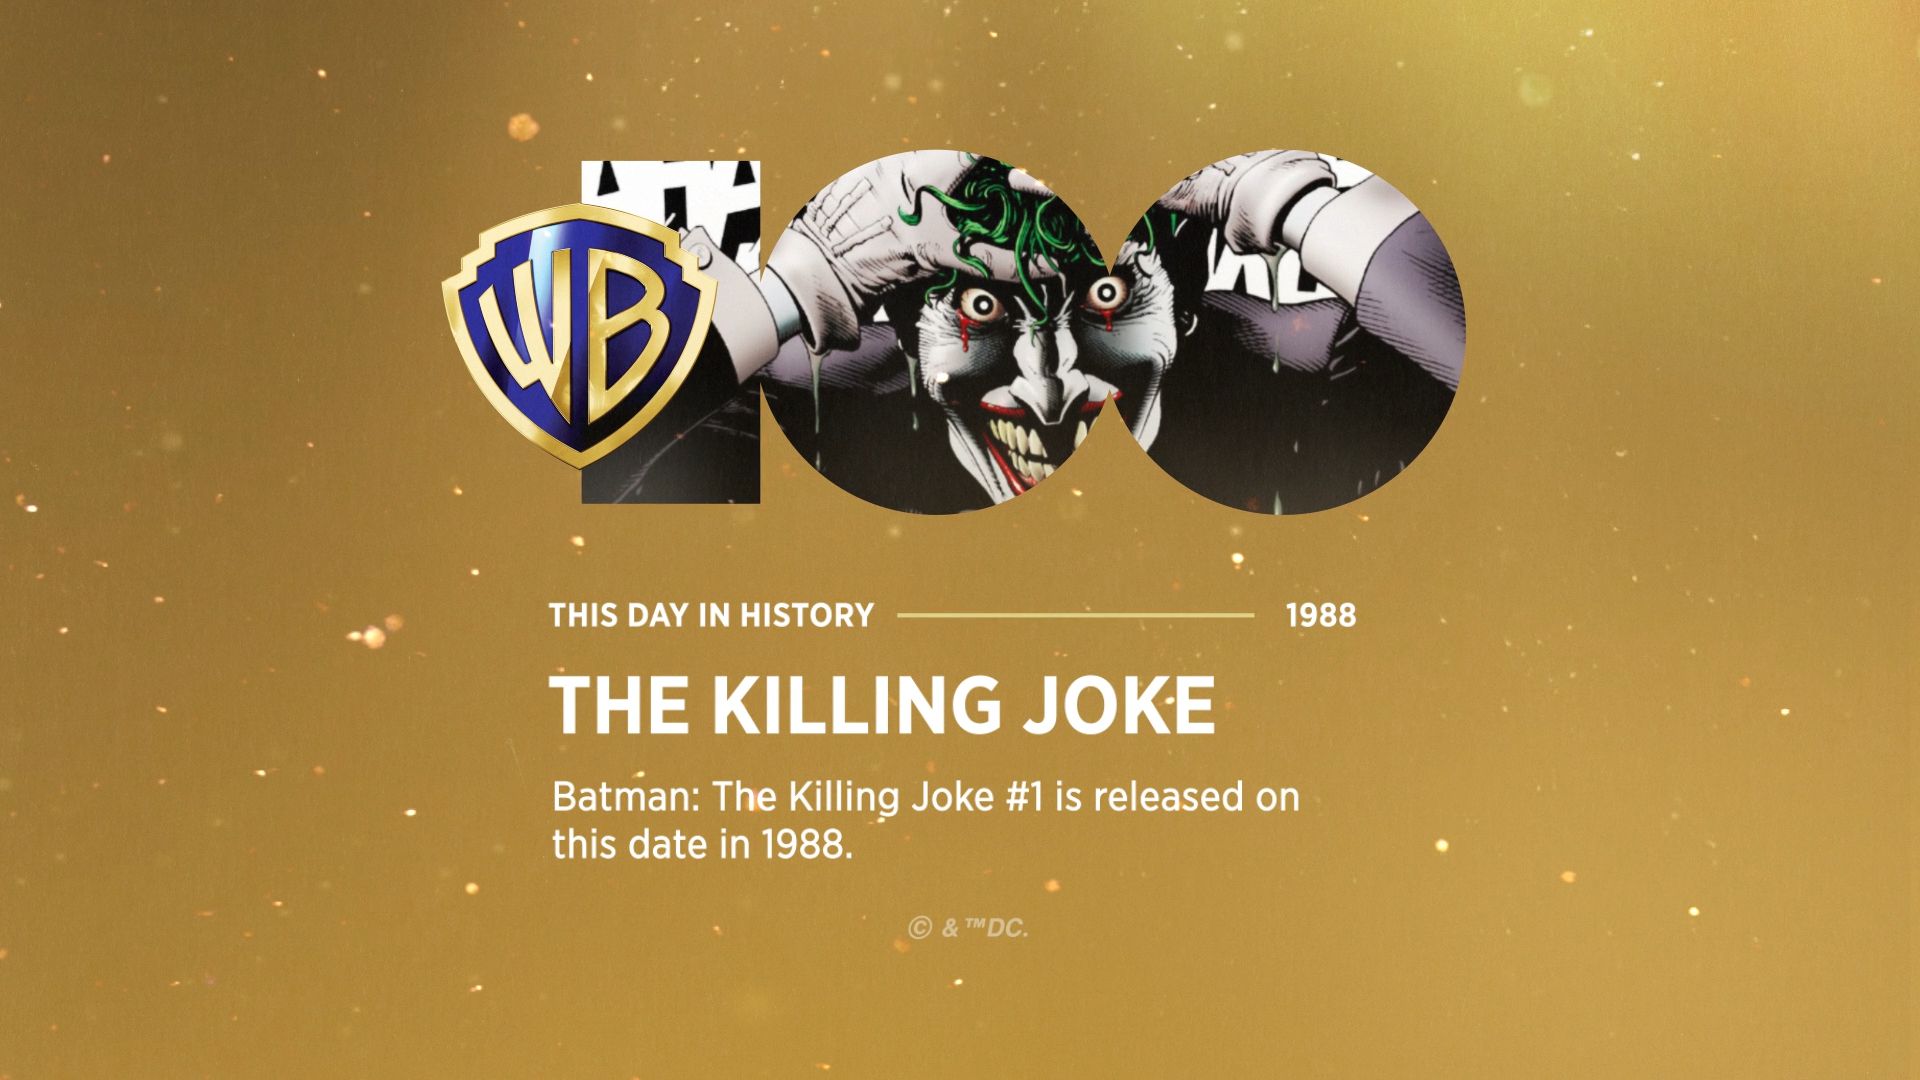 WB100: This Day in History: 'The Killing Joke #1'